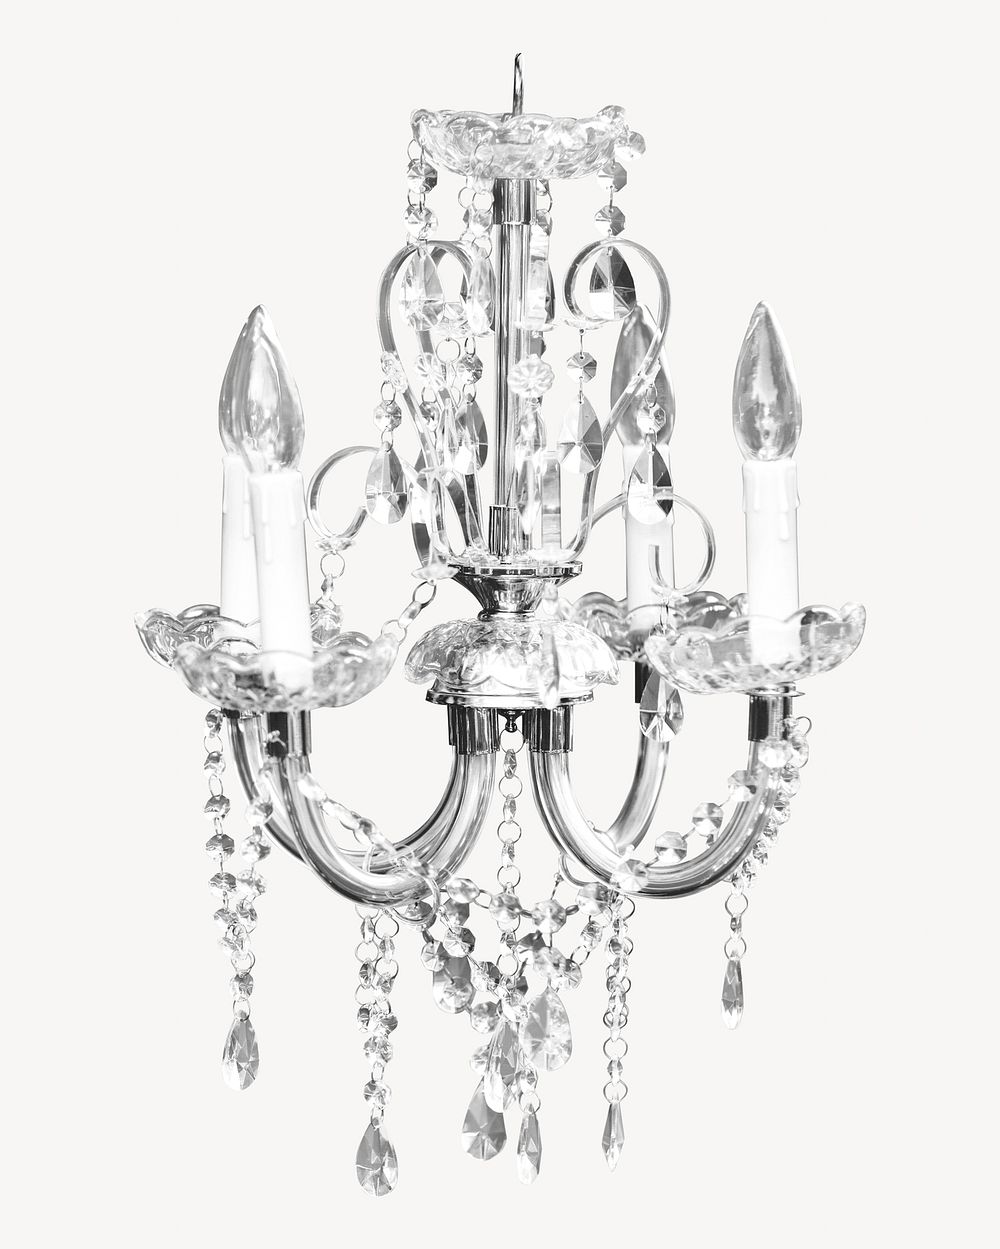 Chandelier isolated image on white